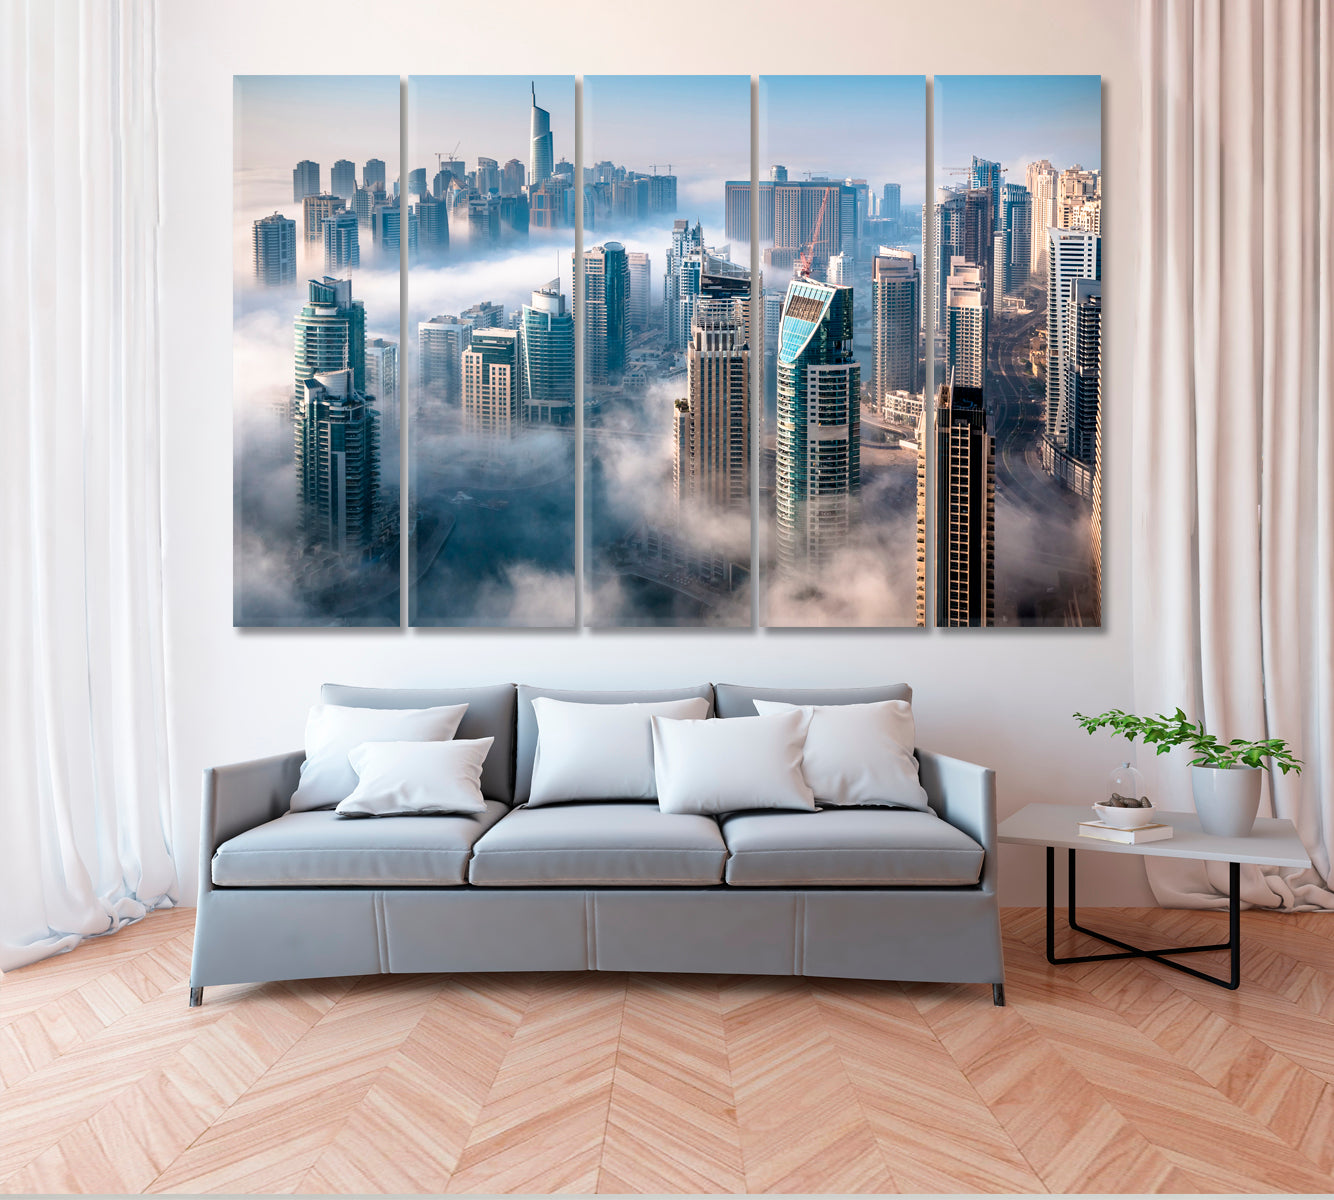 Dubai Skyscrapers on Foggy Day Canvas Print ArtLexy 5 Panels 36"x24" inches 